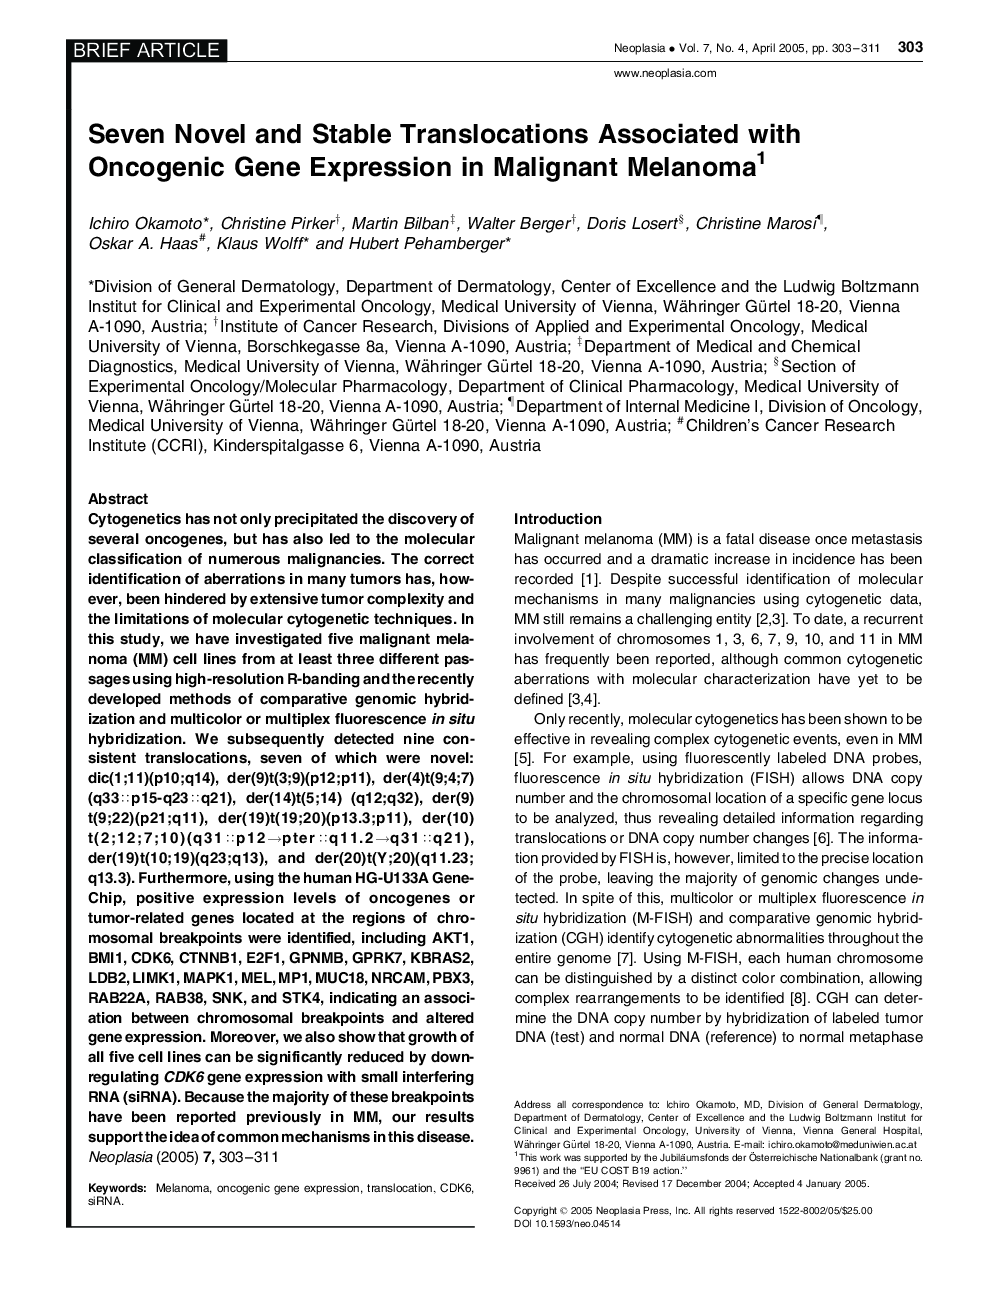 Seven Novel and Stable Translocations Associated with Oncogenic Gene Expression in Malignant Melanoma